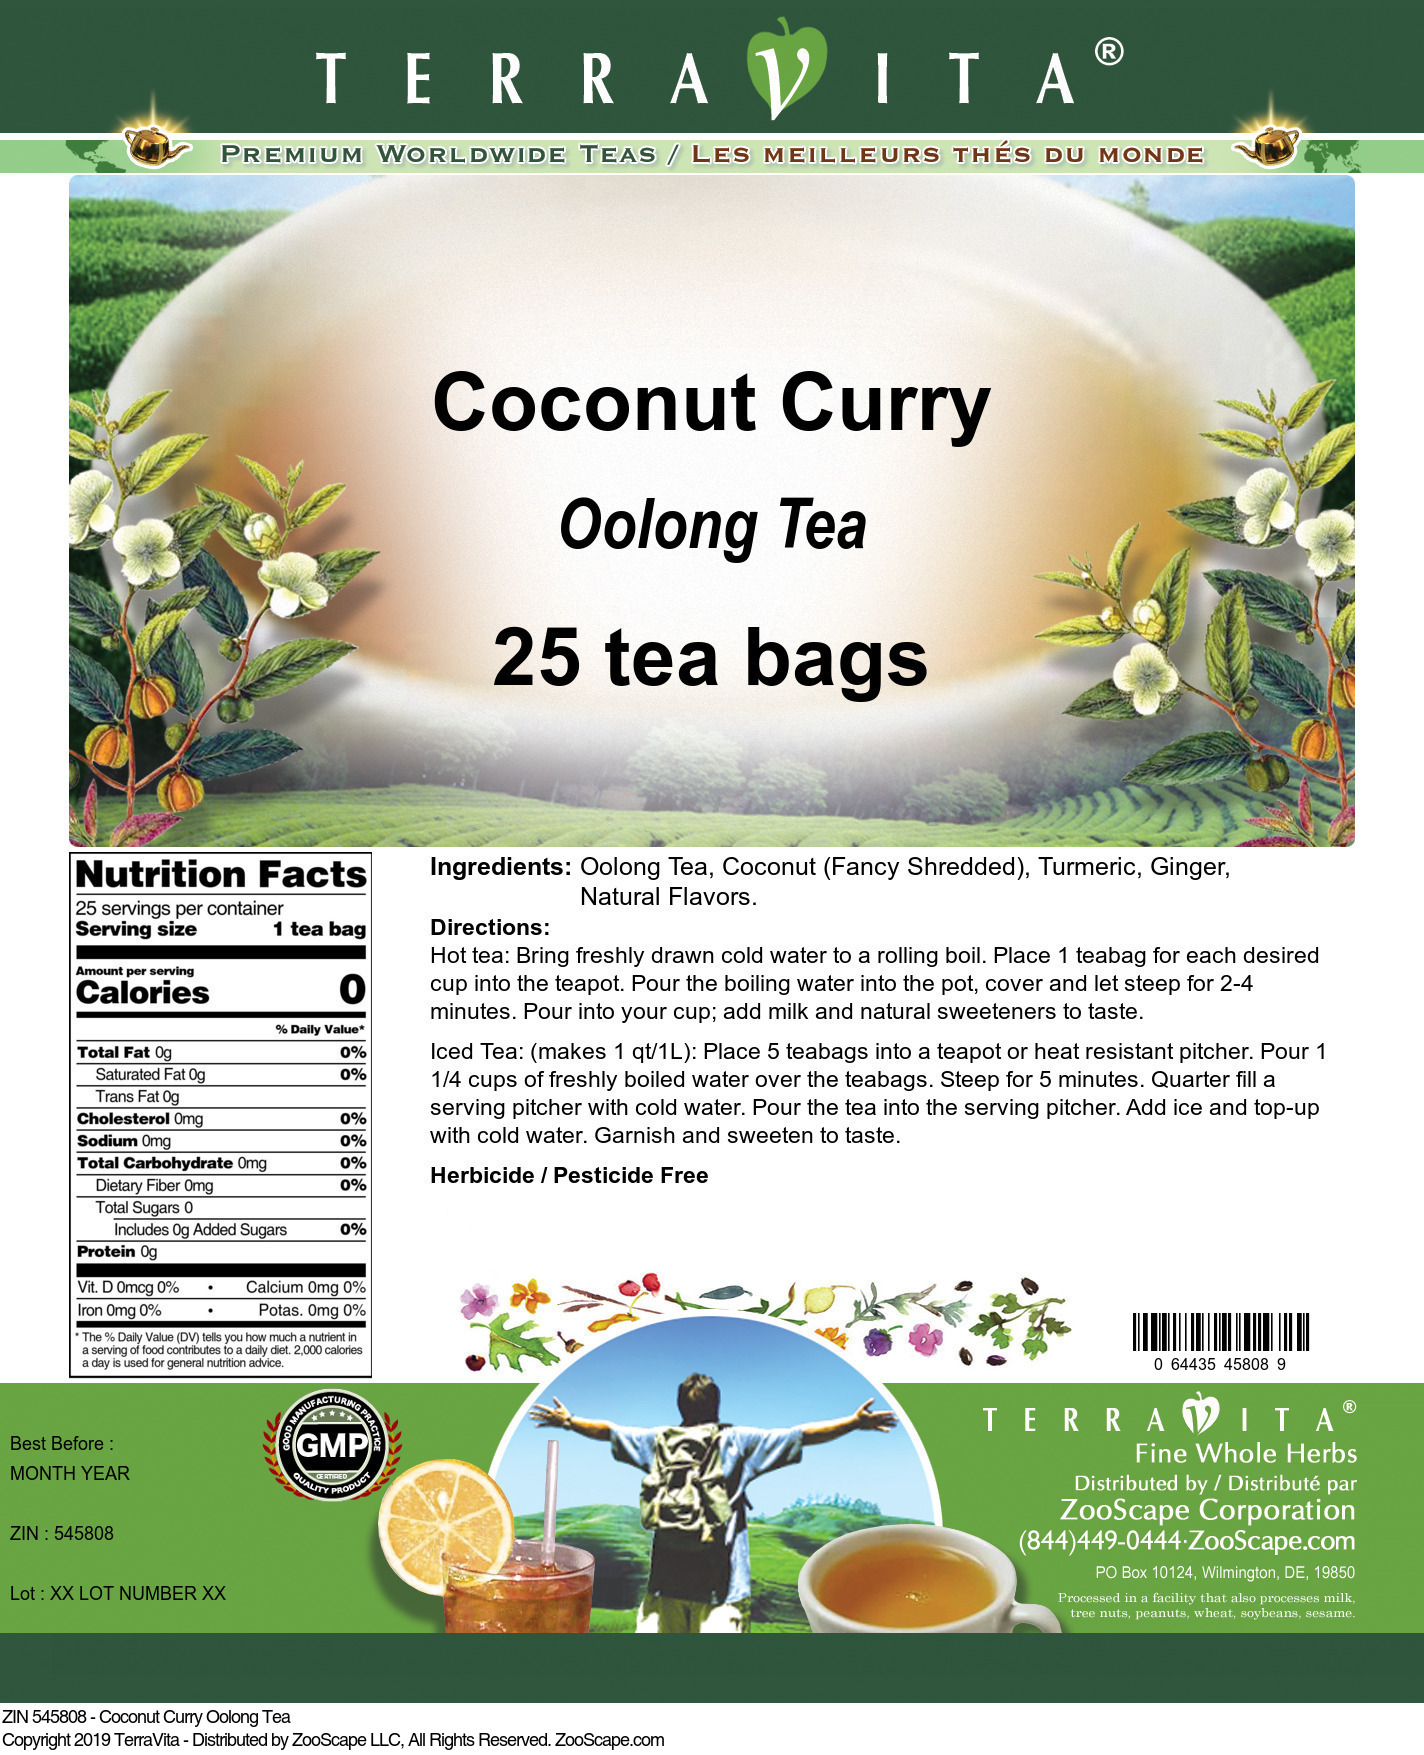 Coconut Curry Oolong Tea - Label